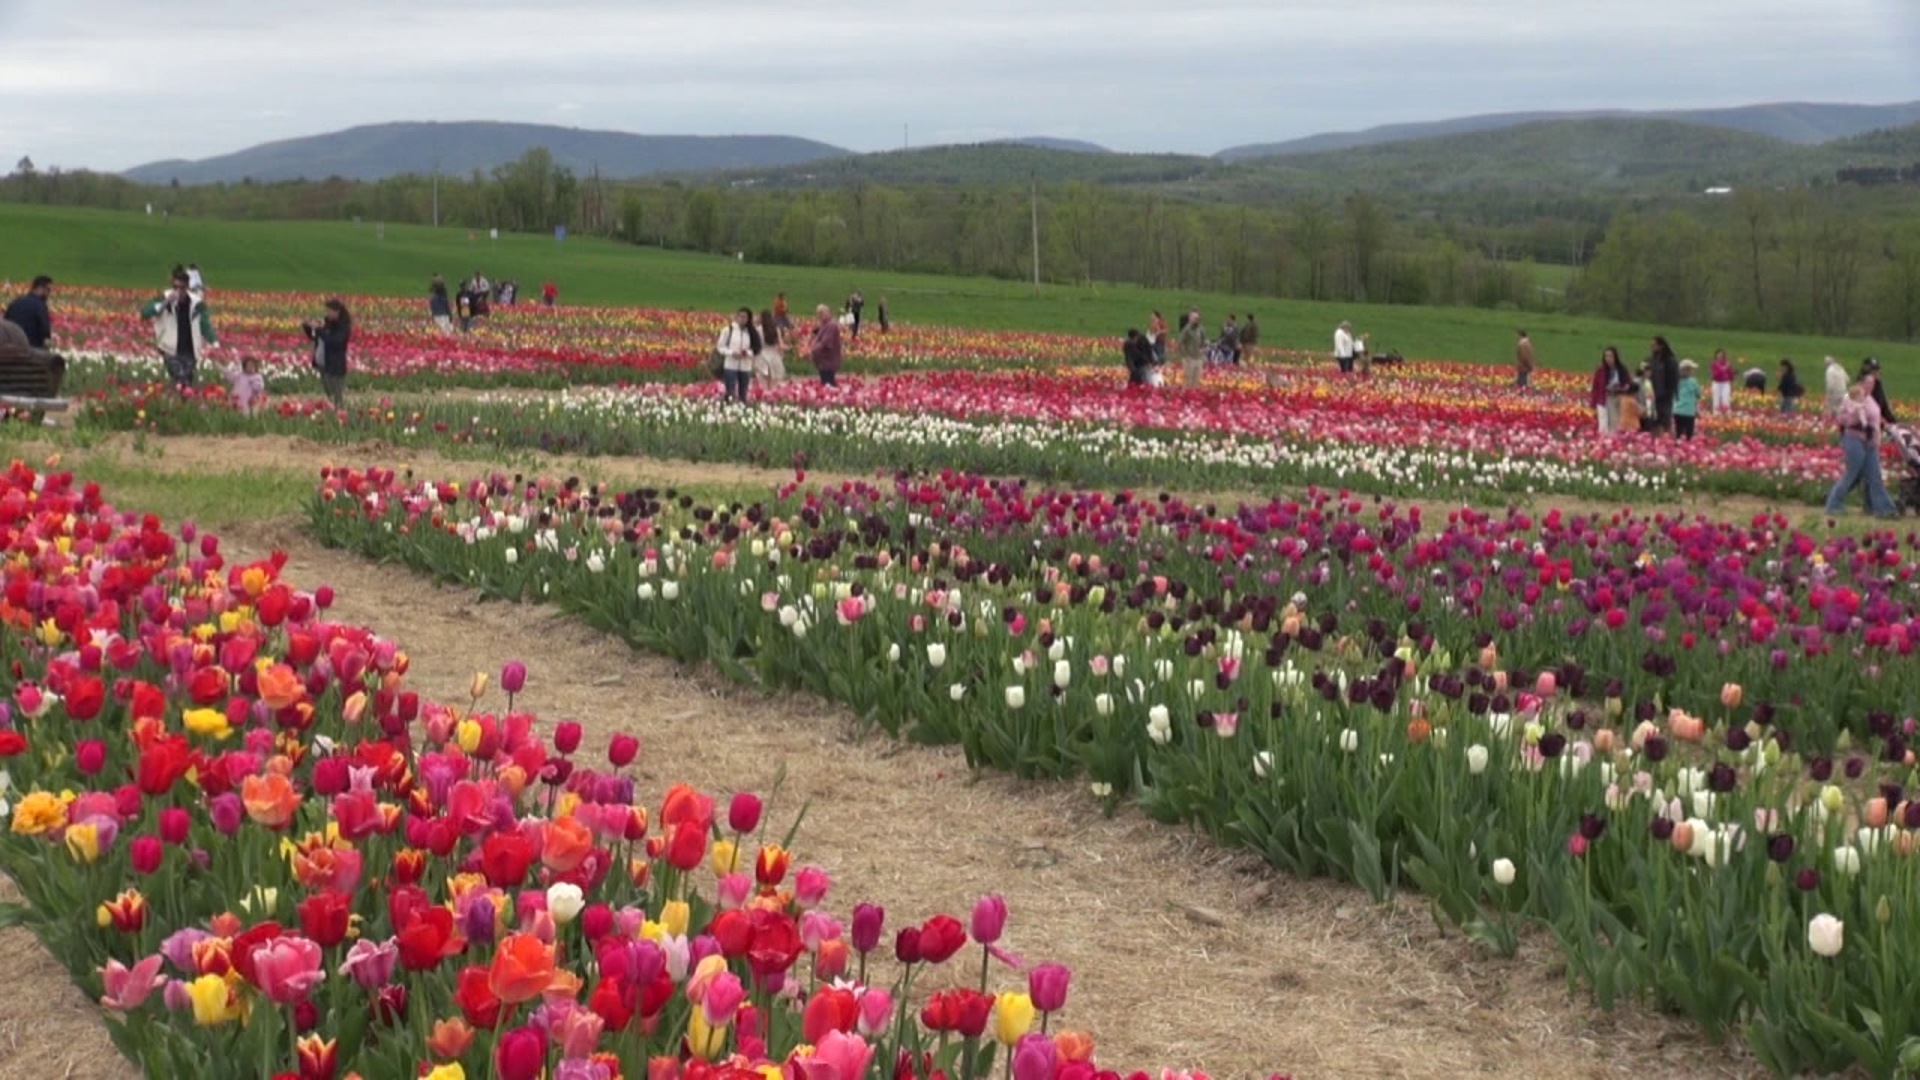 It was a day filled with terrific tulips and baby animals at a farm in Wyoming County.